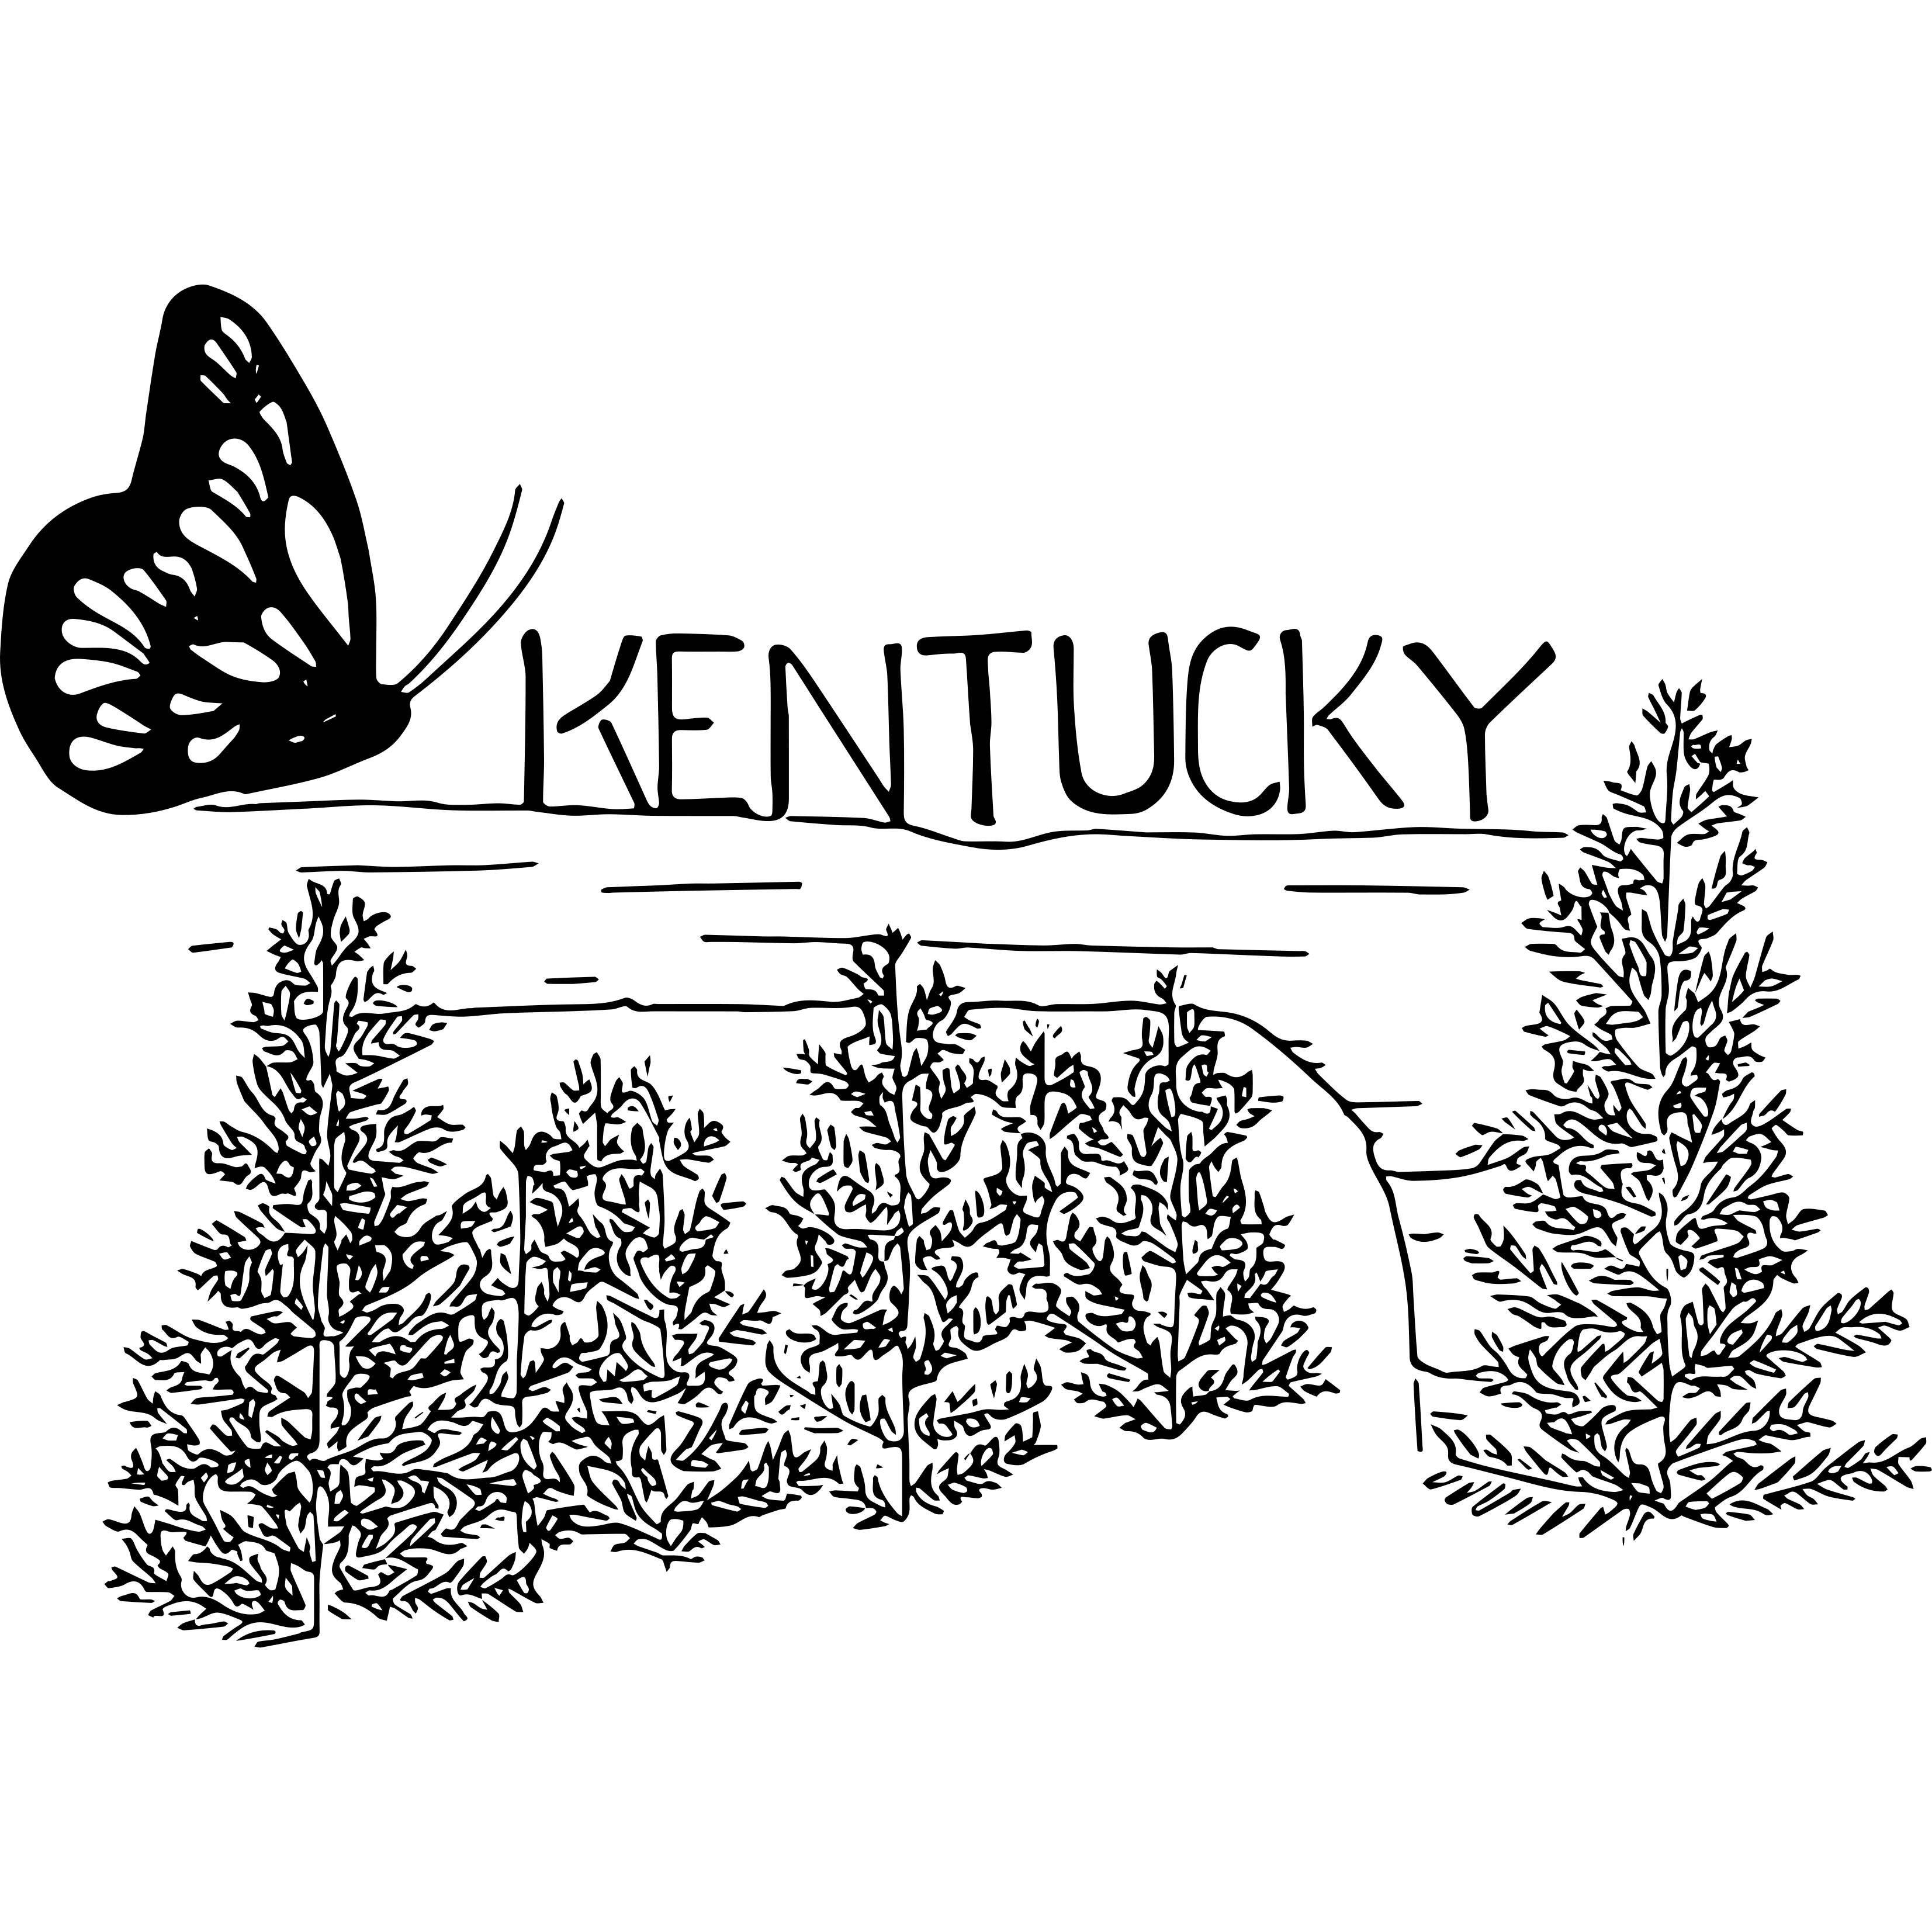 Kentucky words over a river and pines with a butterfly.